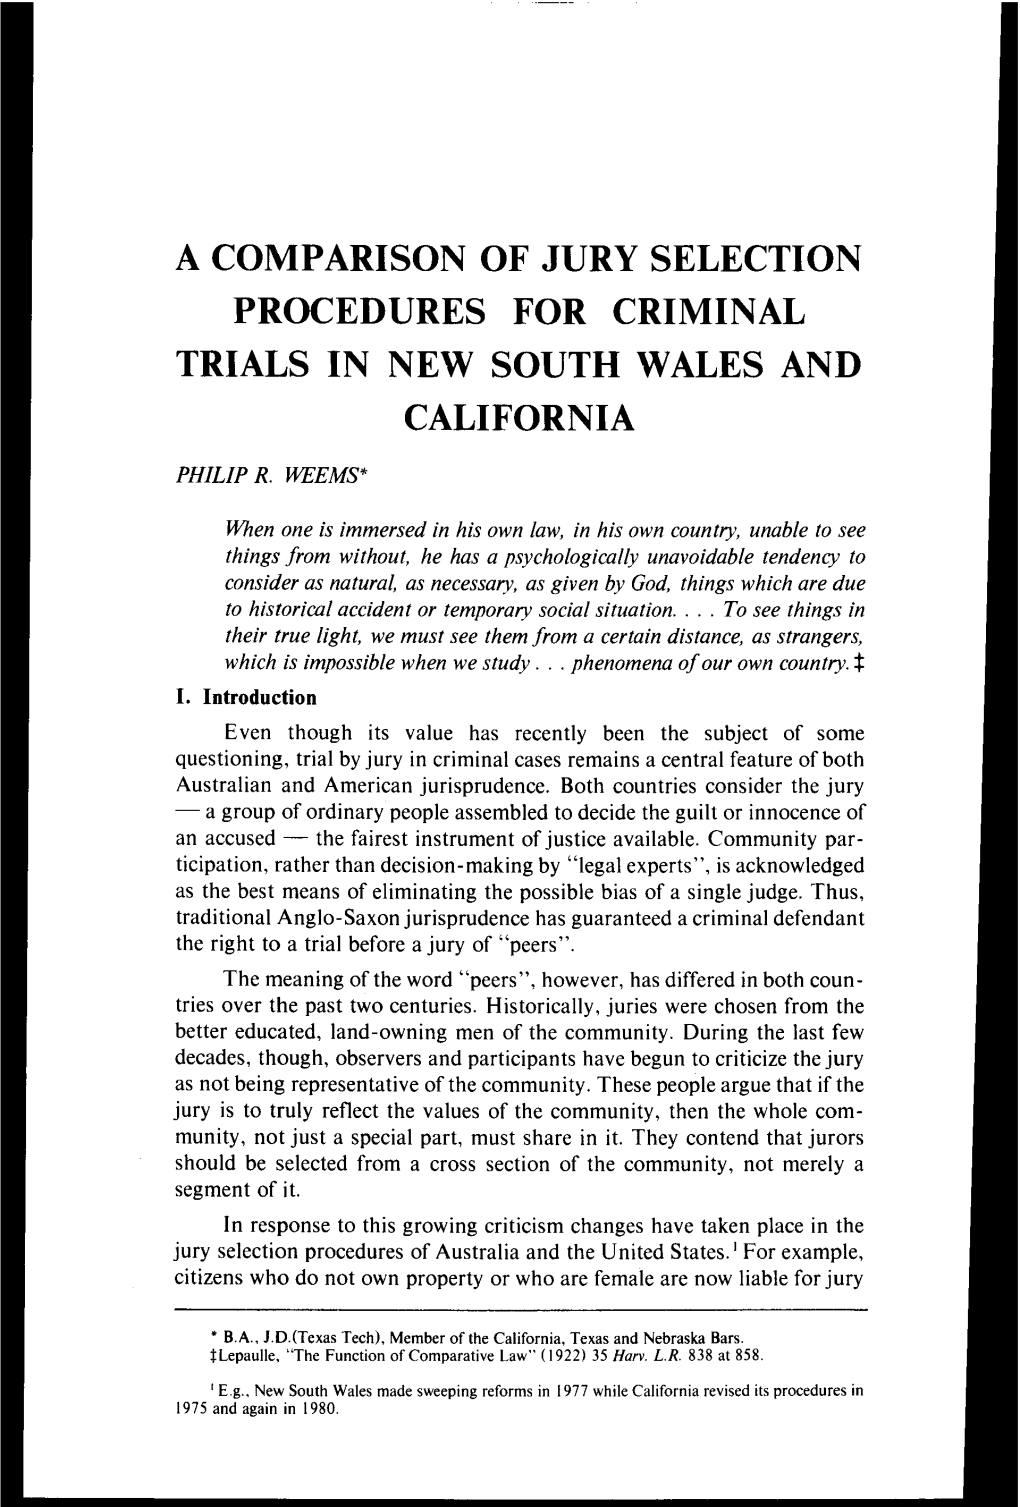 A Comparison of Jury Selection Procedures for Criminal Trials in New South Wales and California